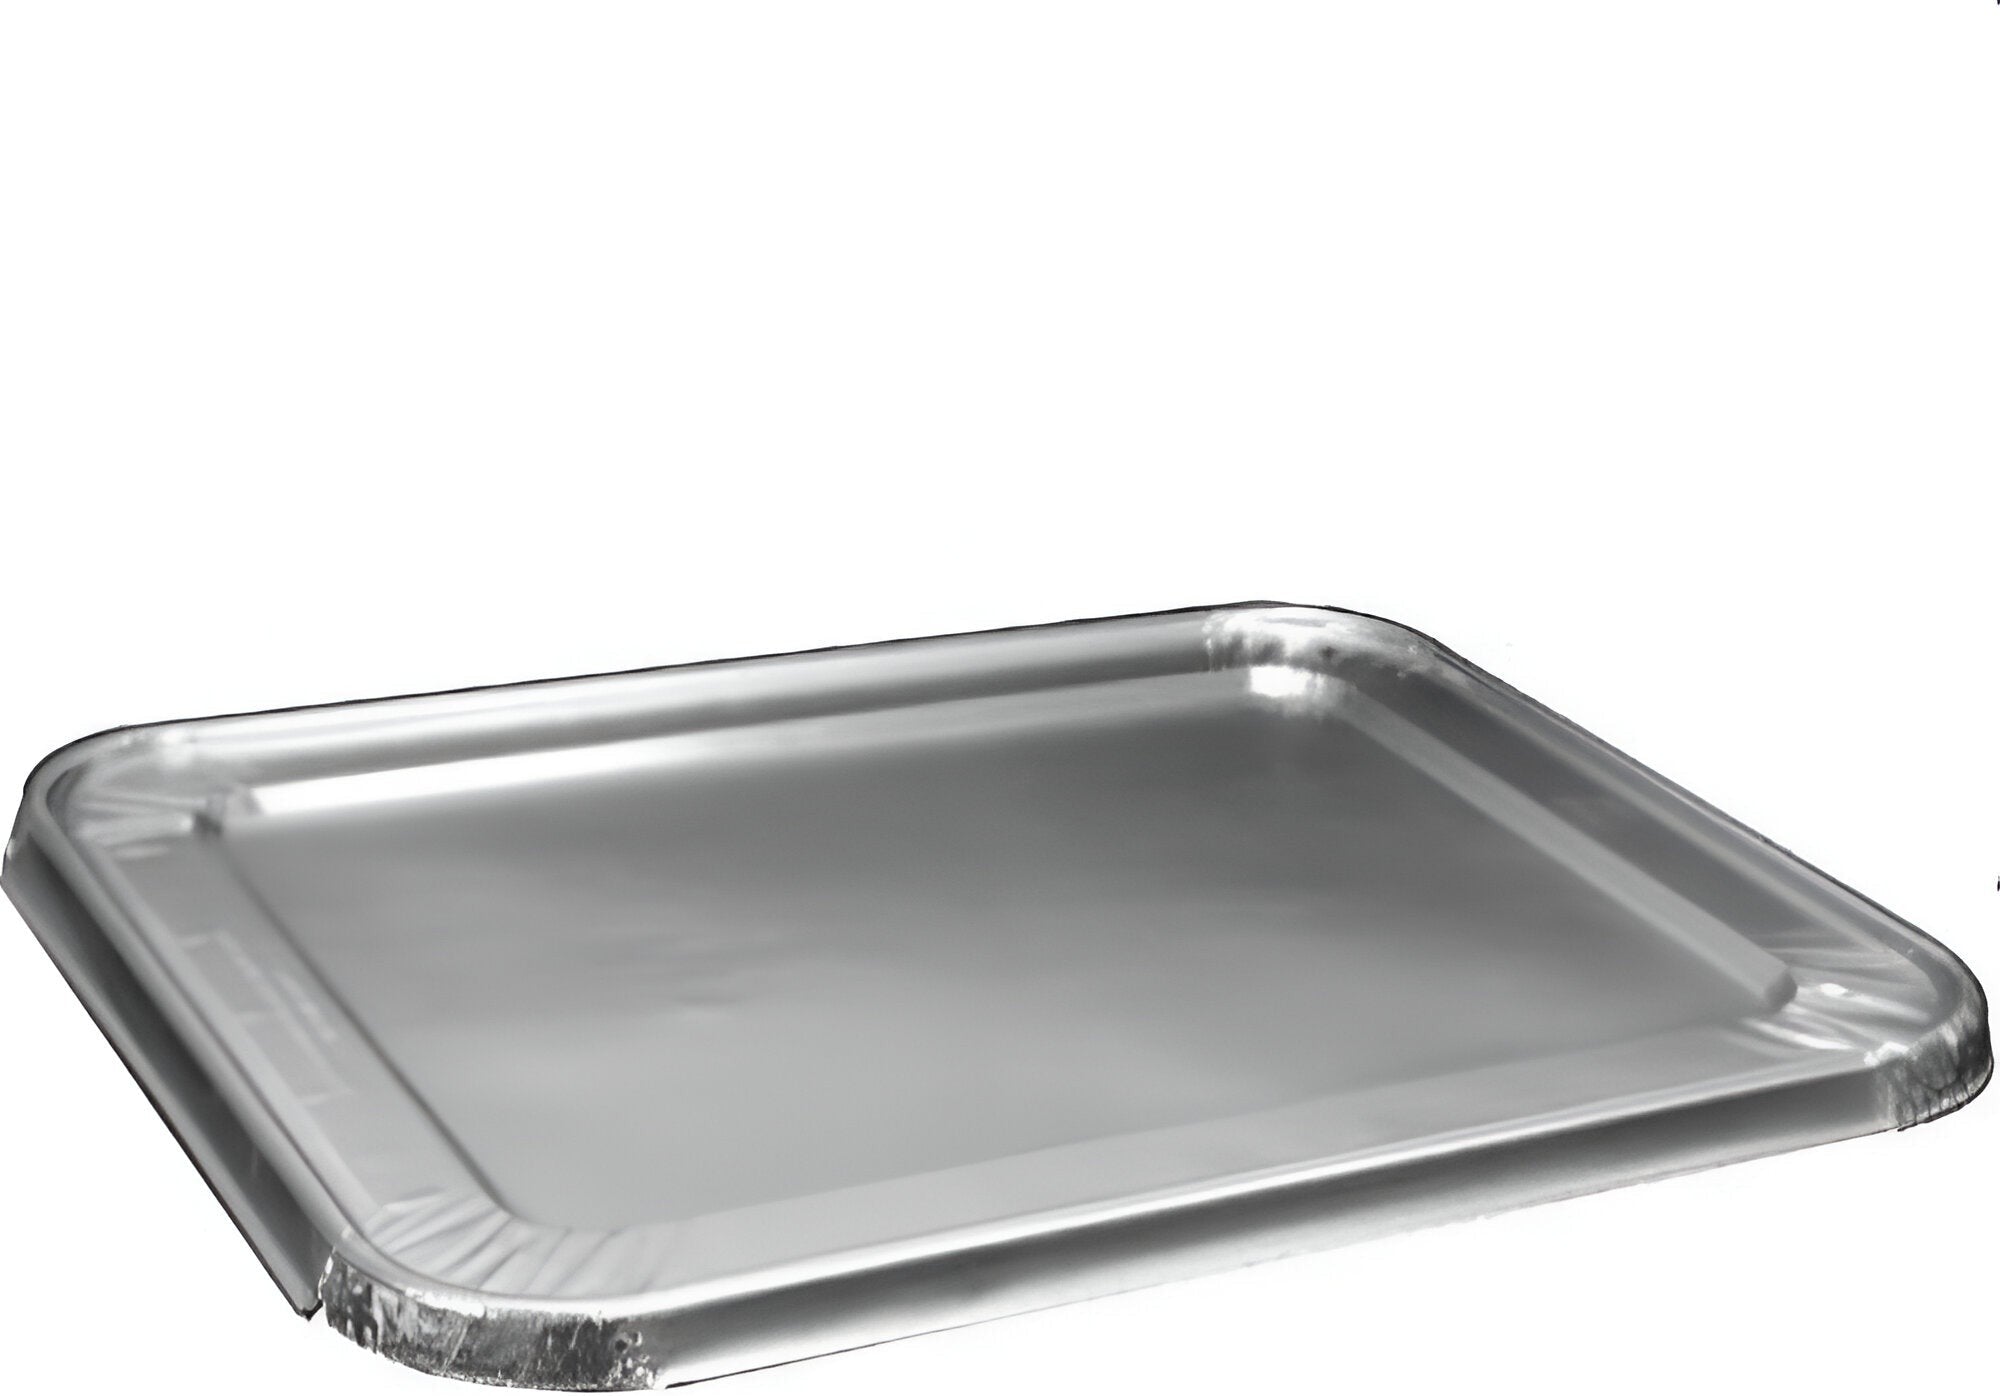 HFA - Foil Lid For Half Steam Table Pan Foil Containers, 100/Cs - 2049-00-100